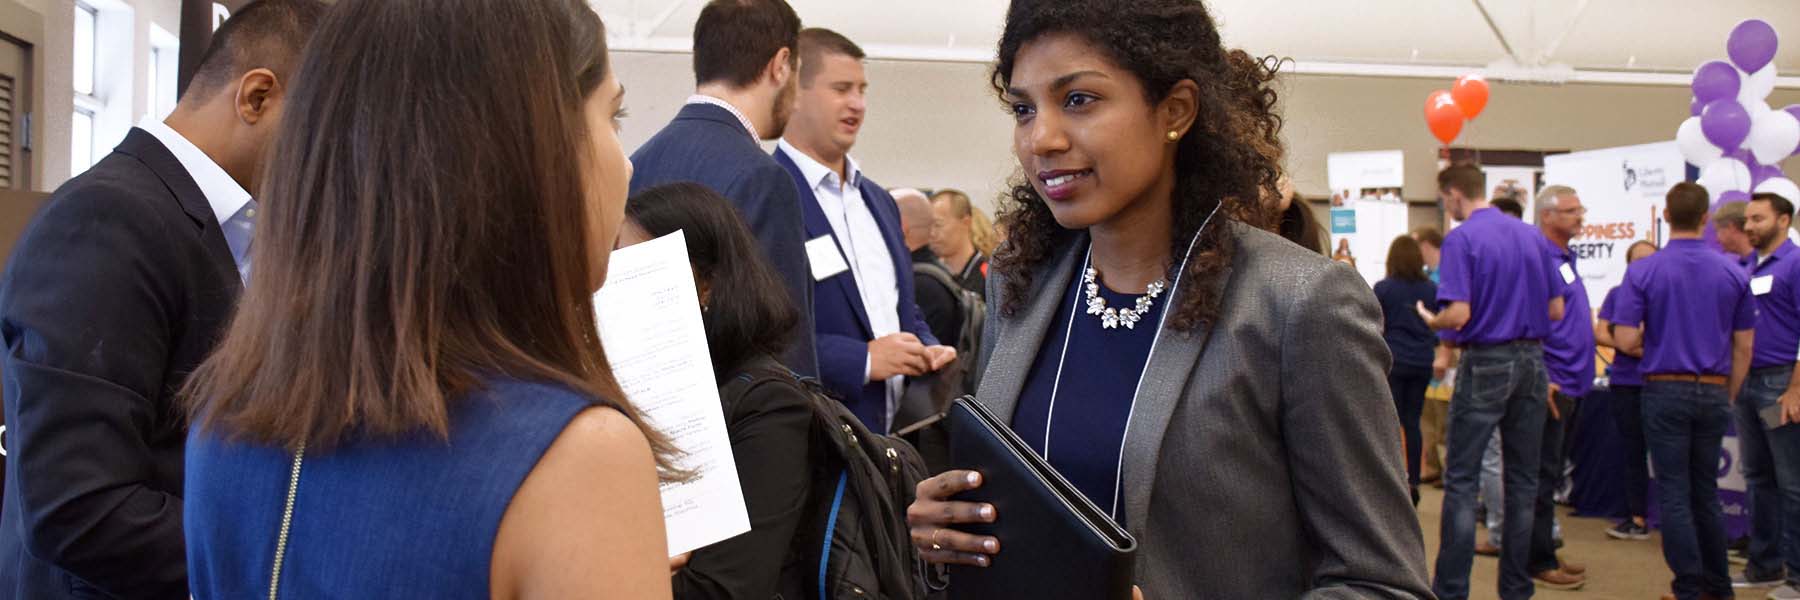 A student holds a portfolio and speaks with a representative at a career fair.